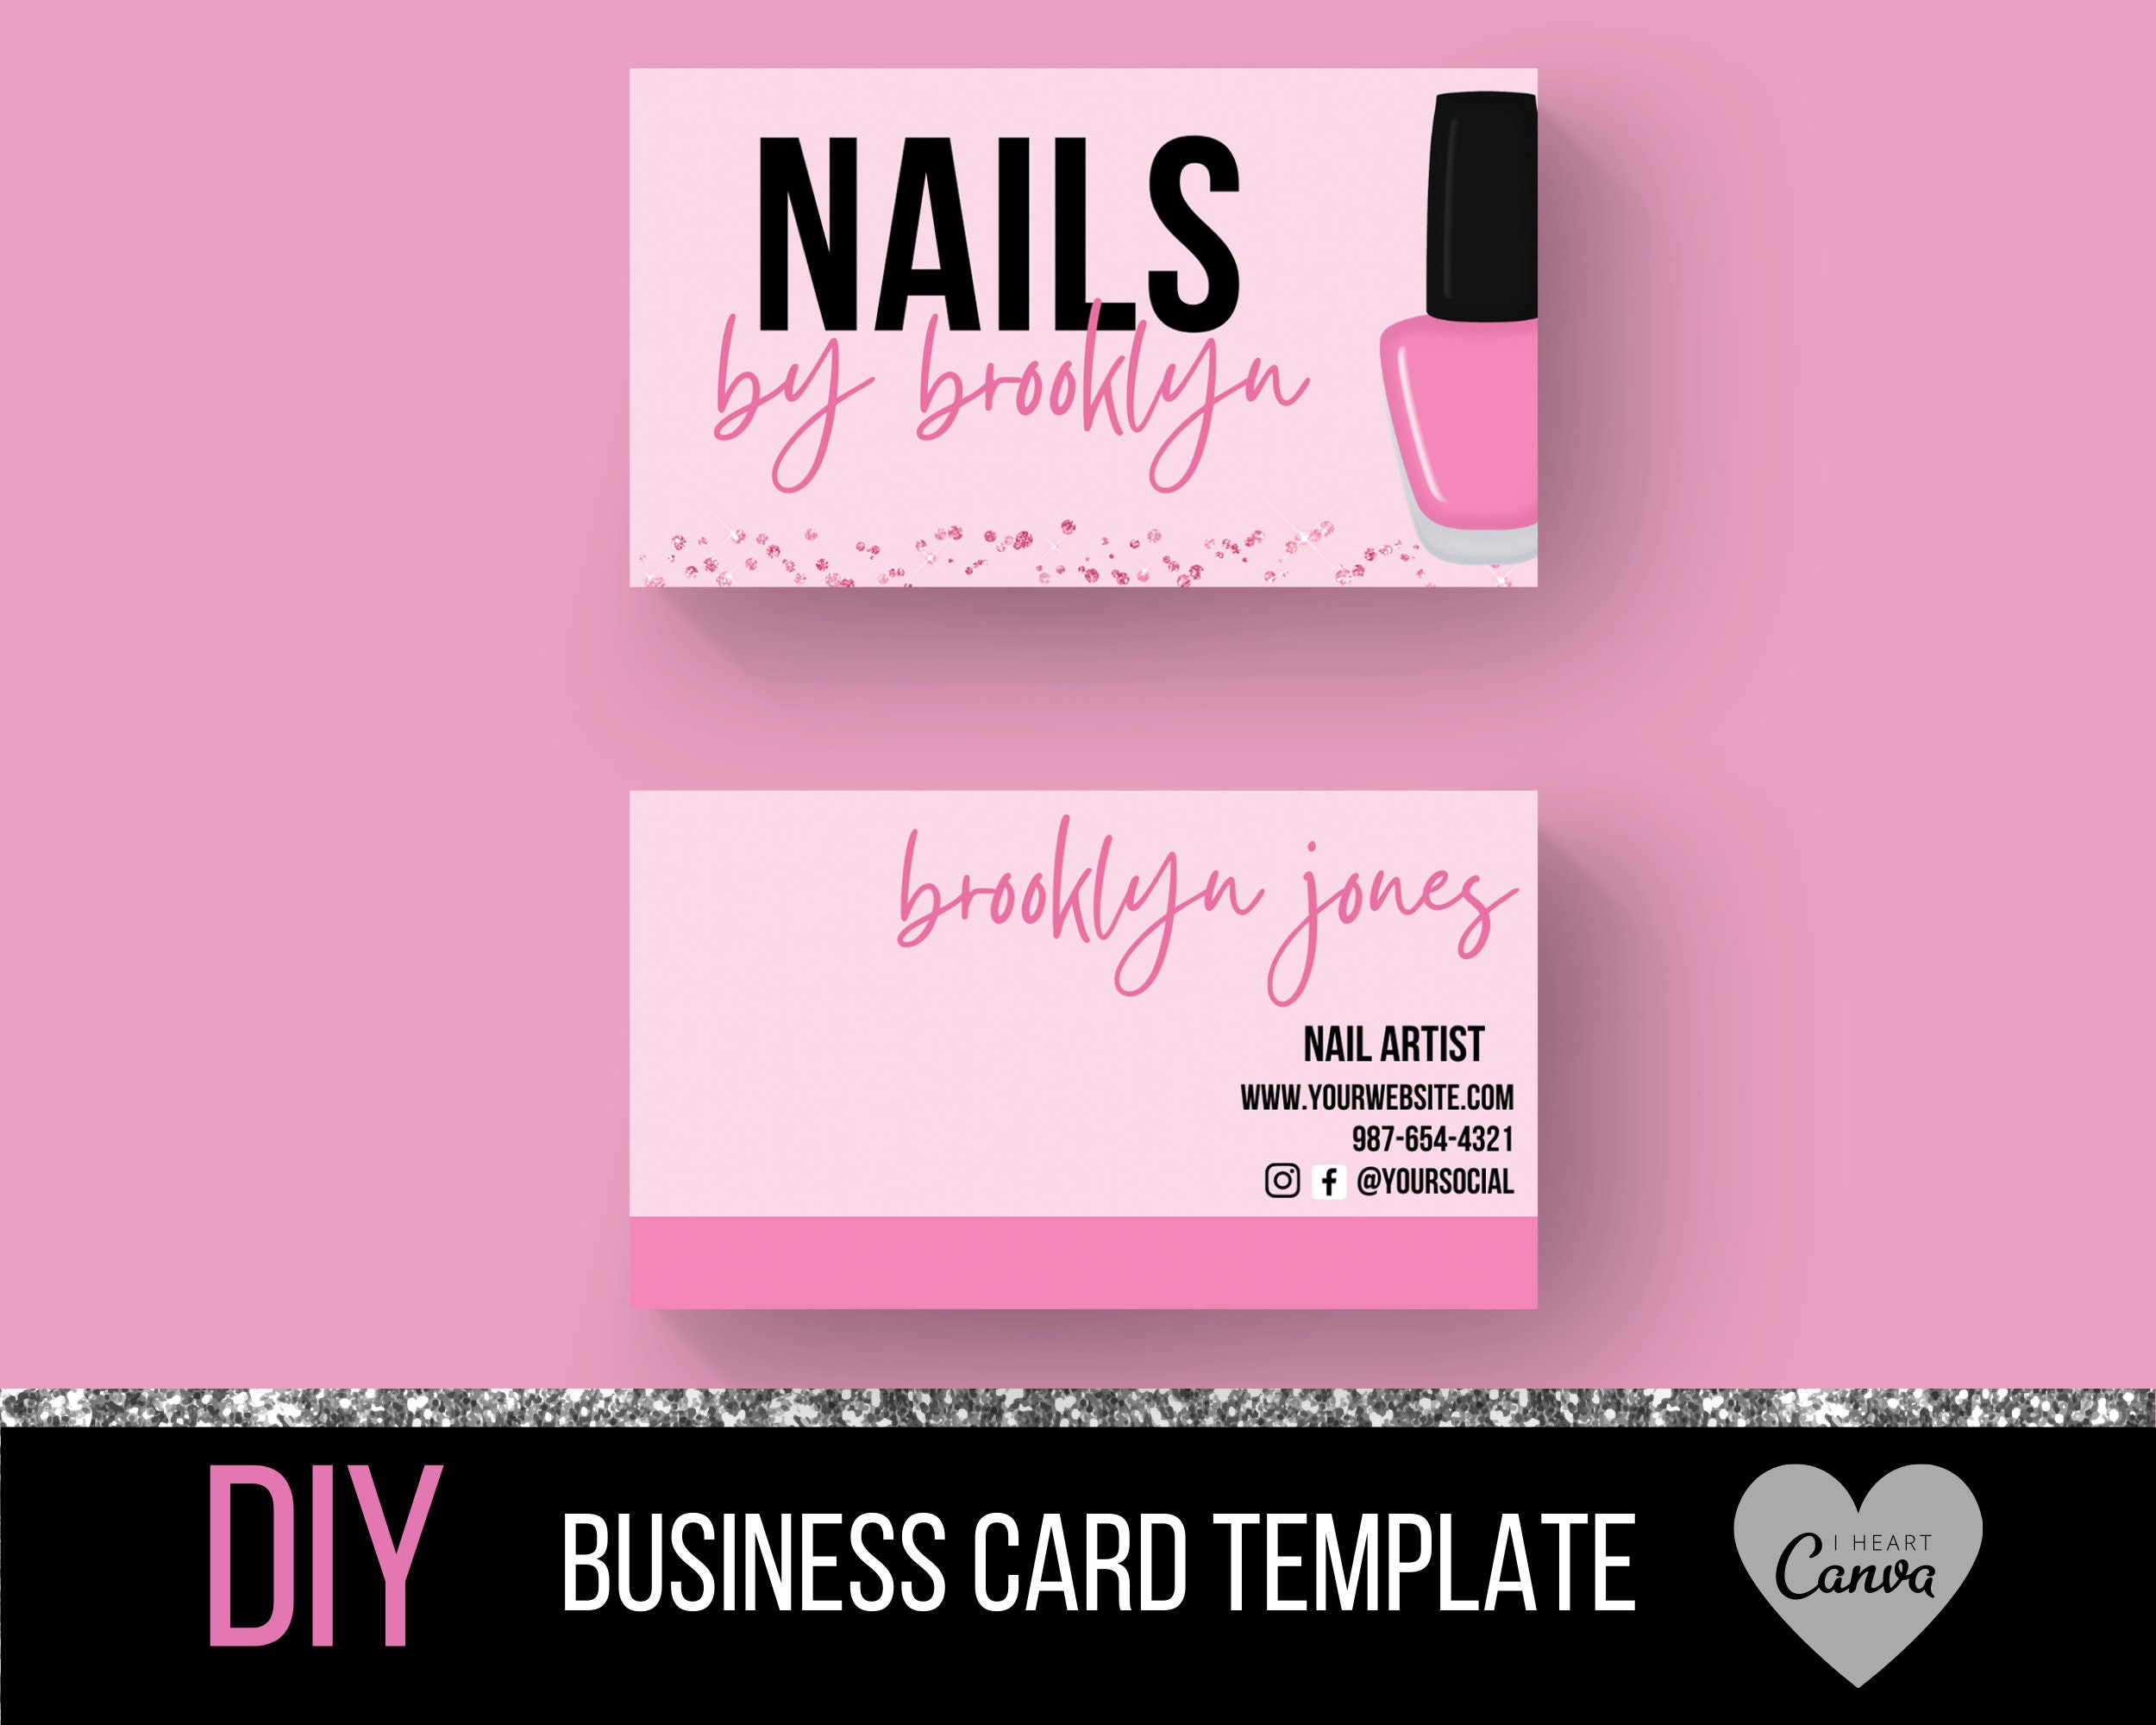 nail business cards ideas 8